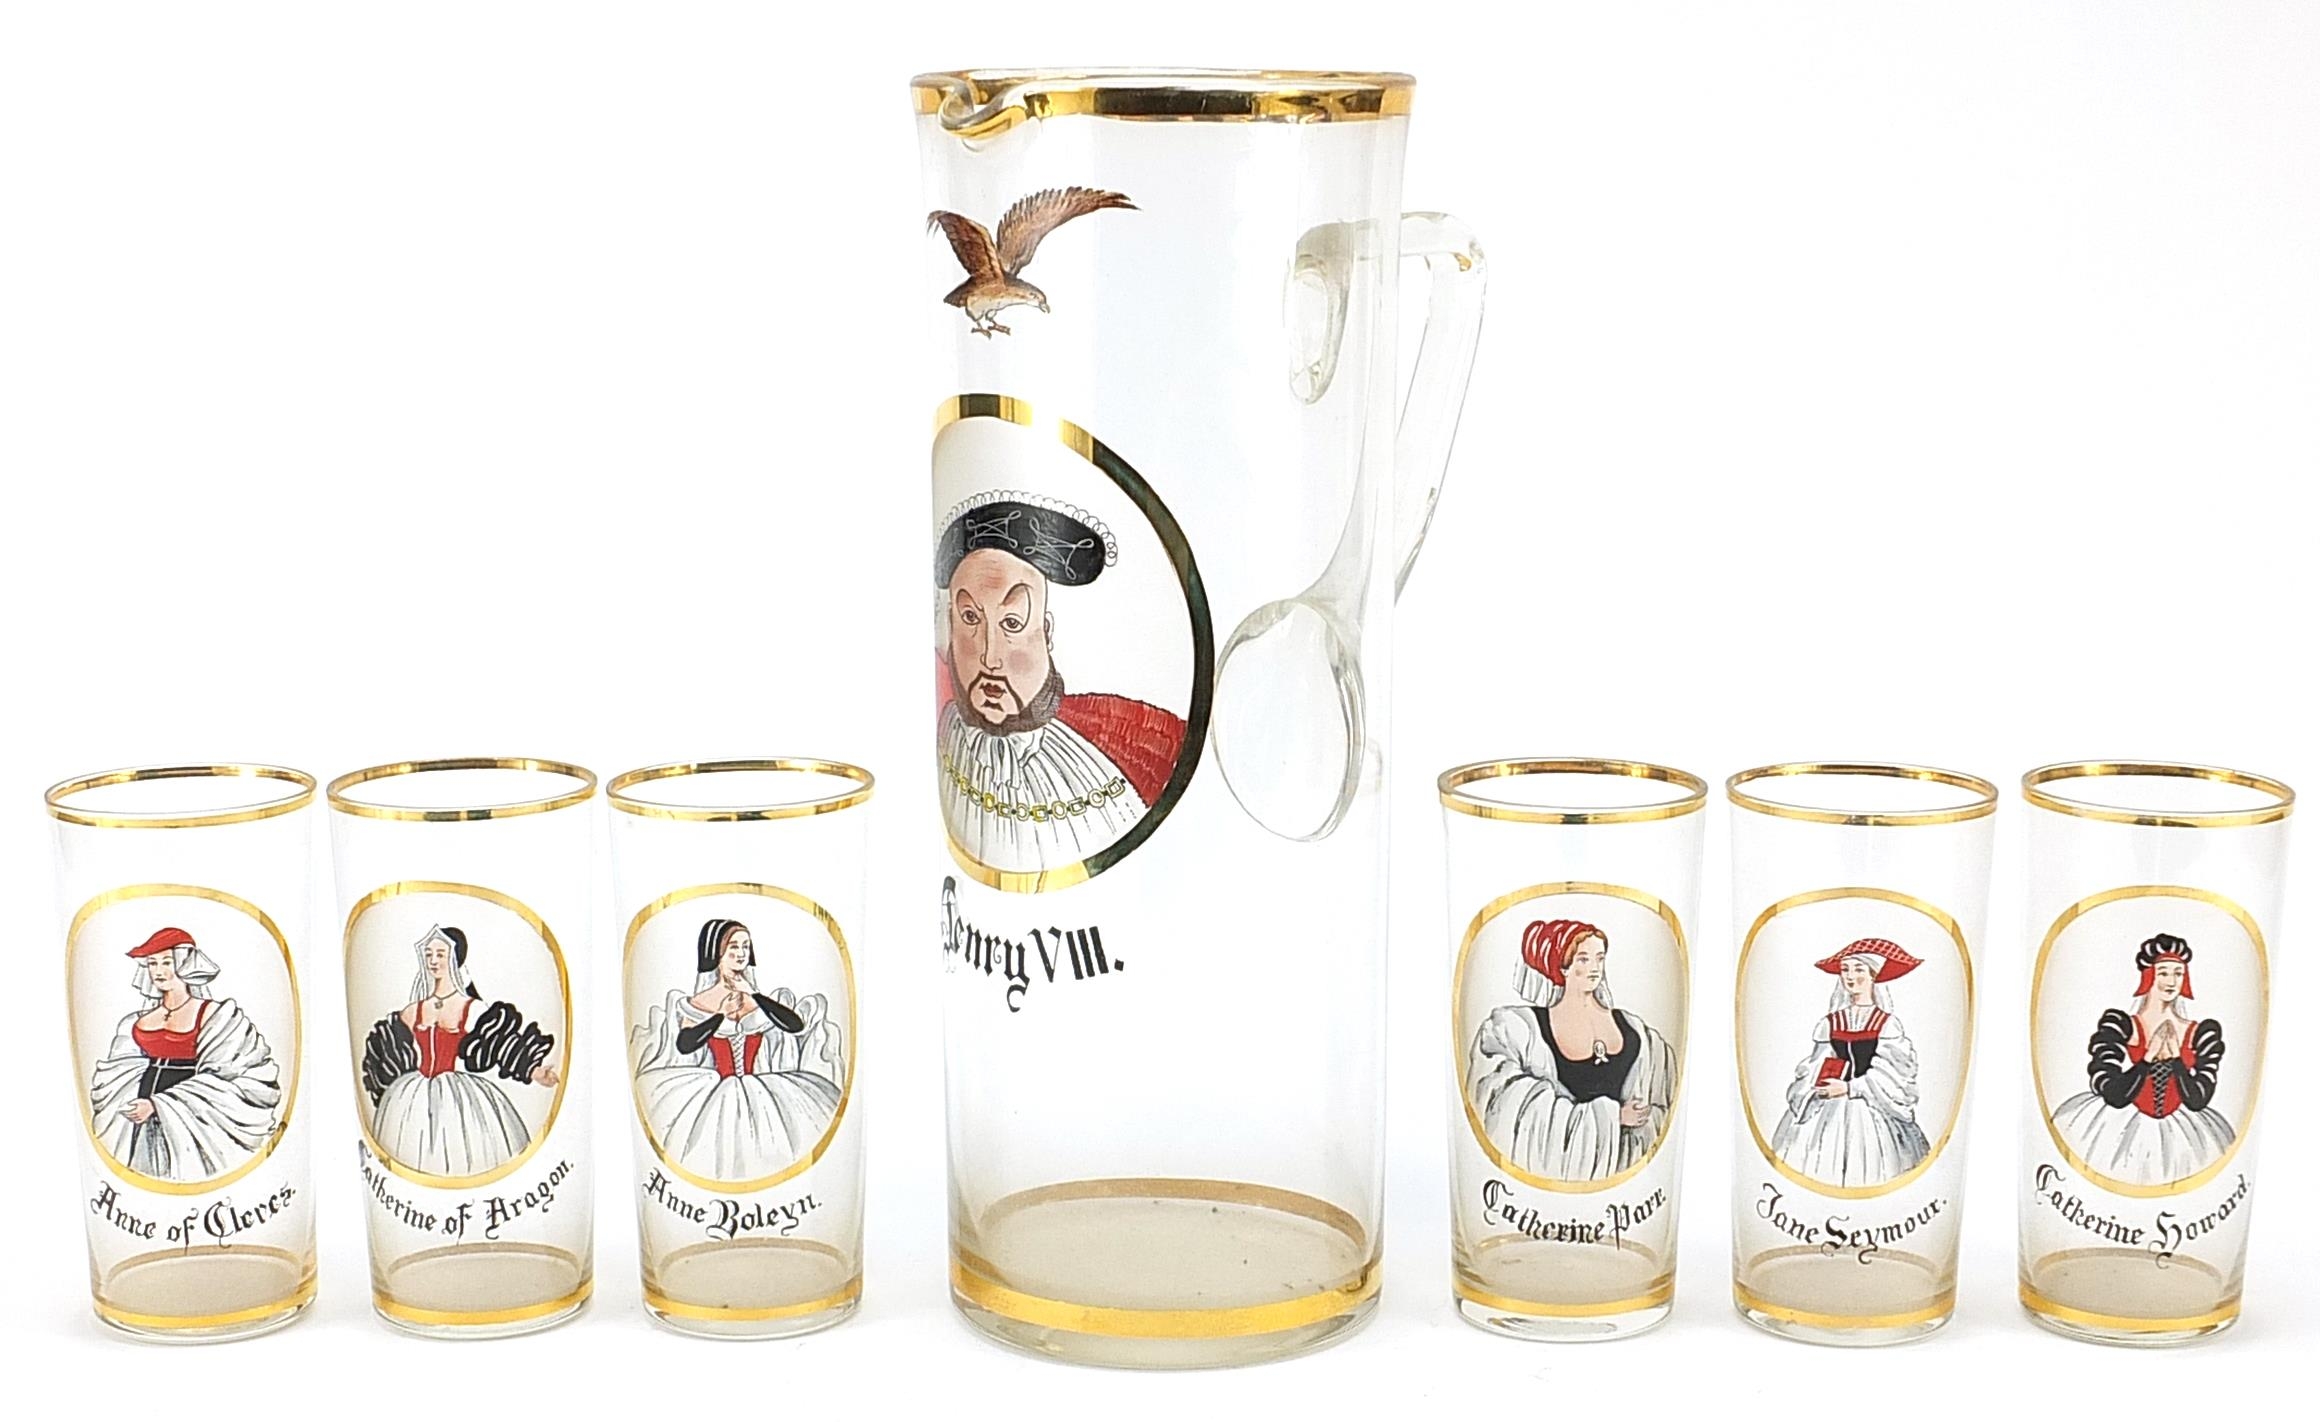 Henry VIII and six wives design lemonade jug and six glasses, the largest 30.5cm high